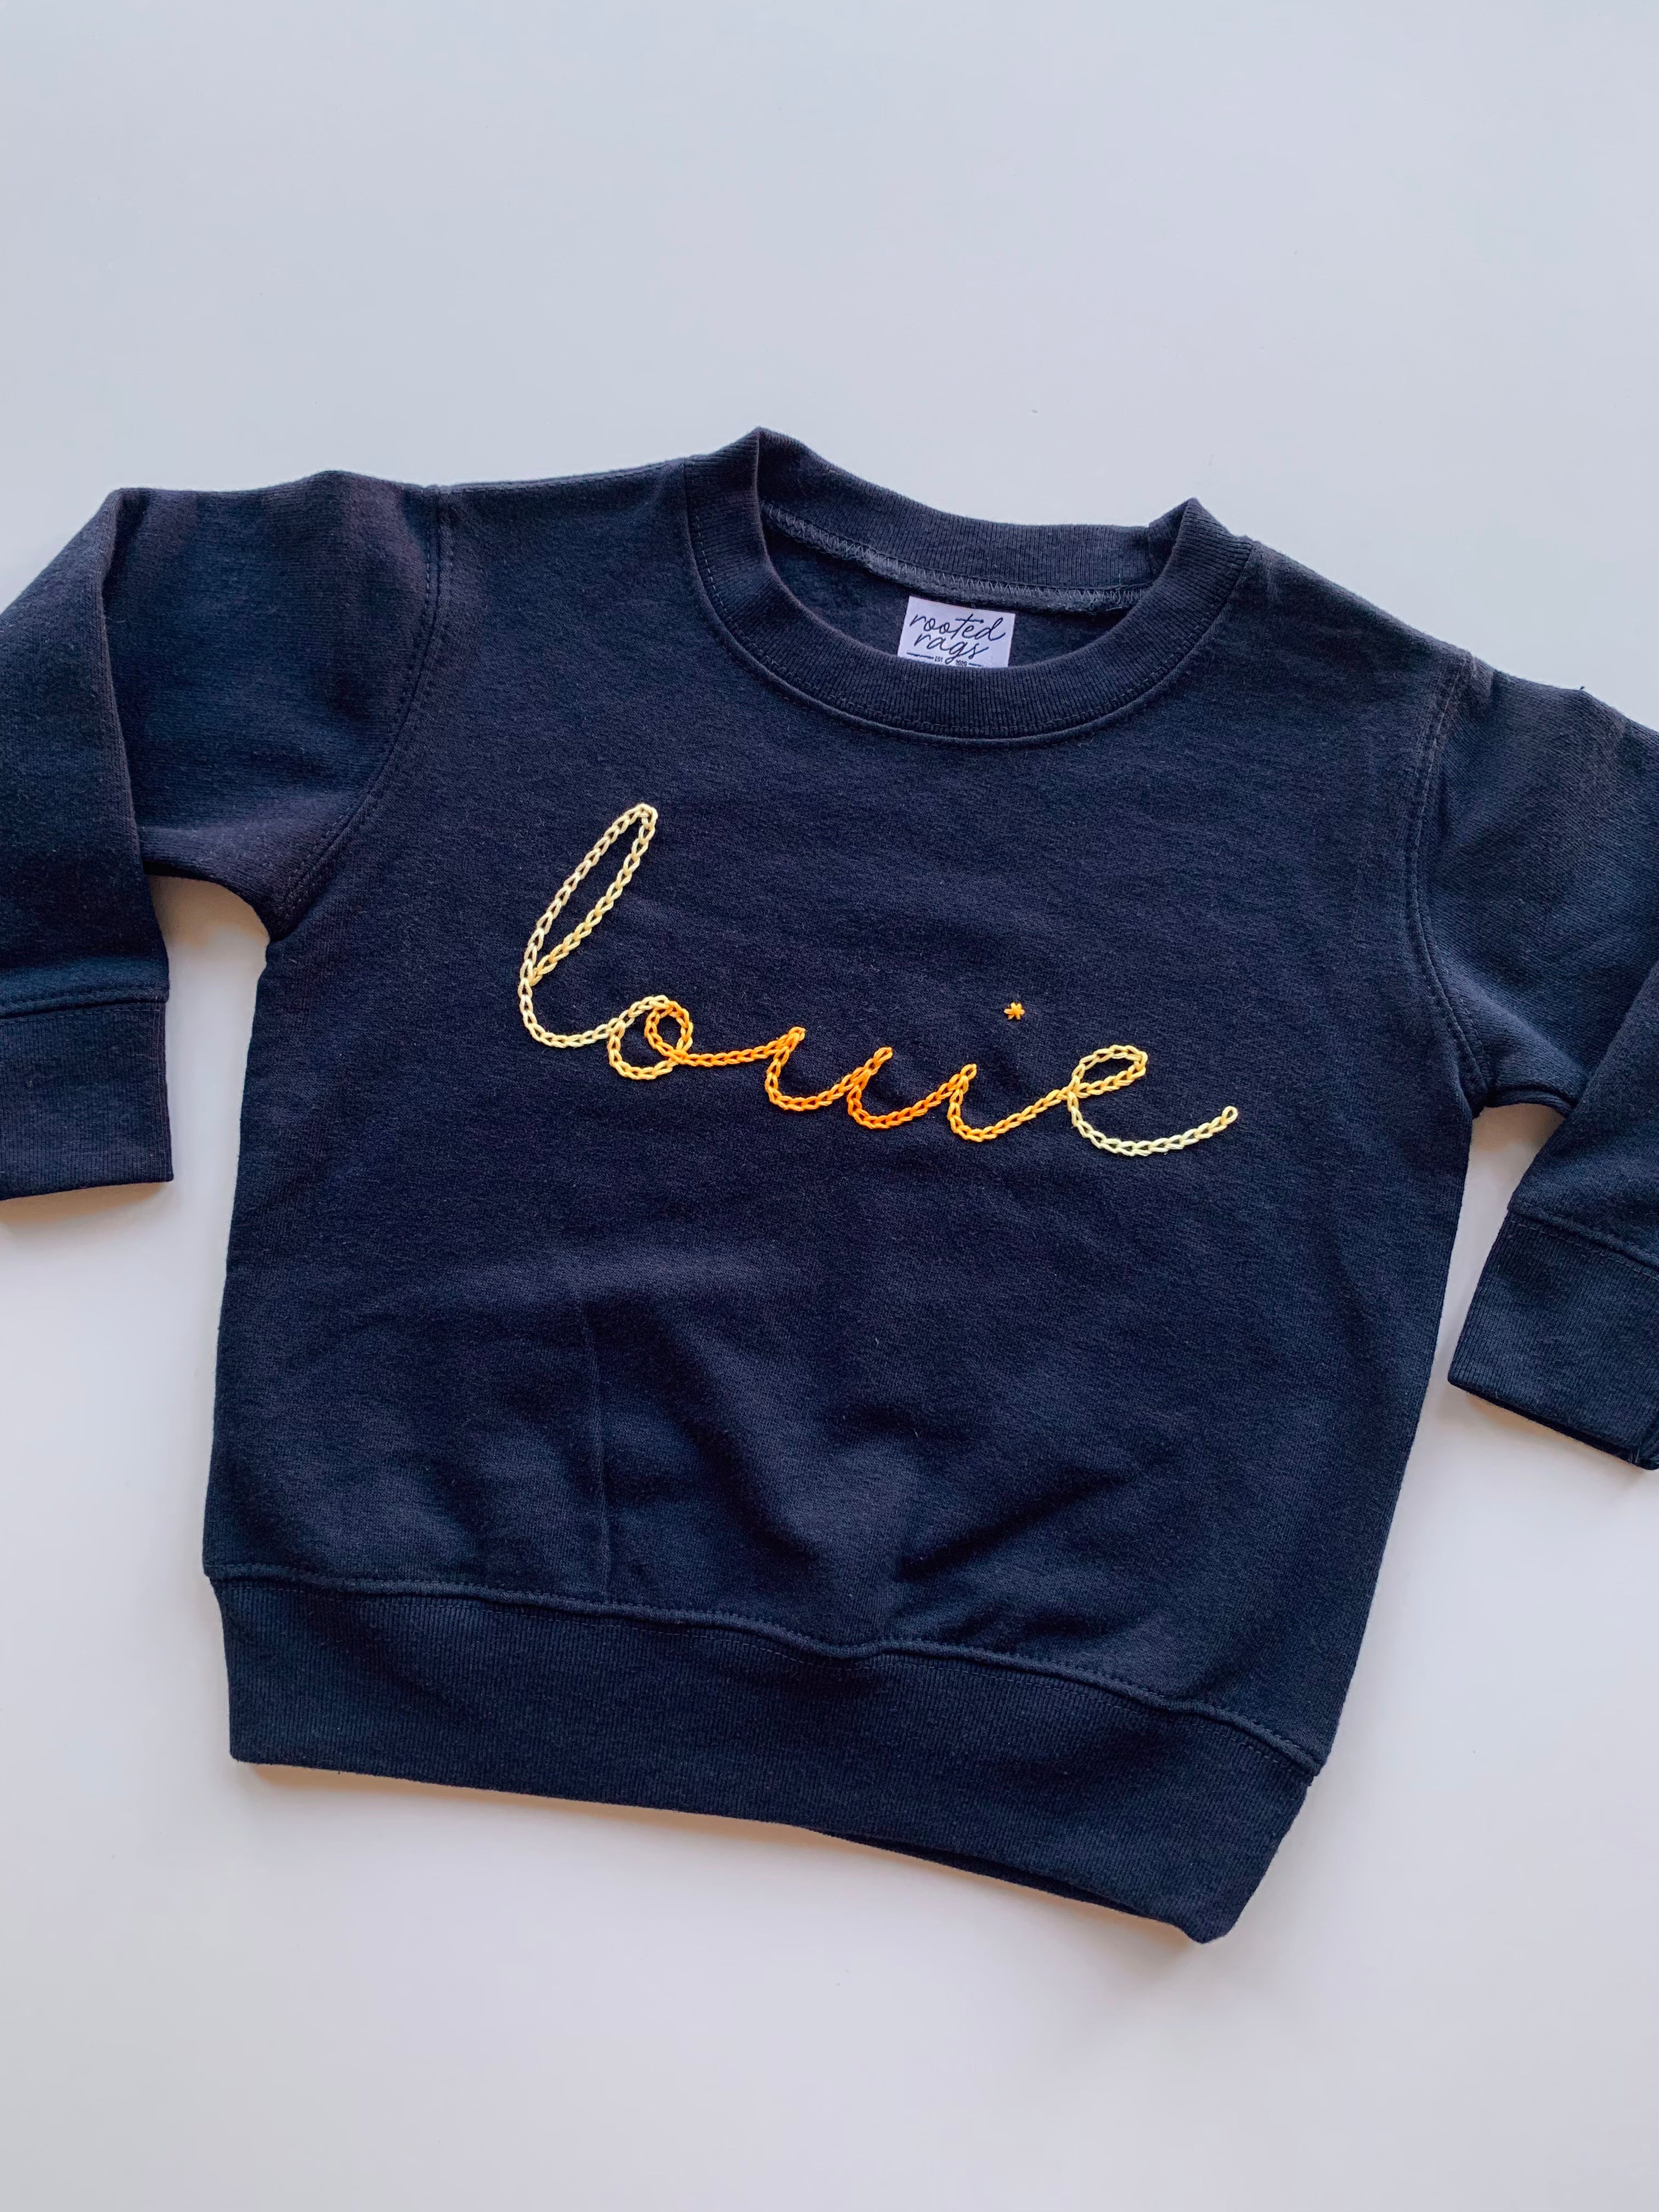 Hand Embroidered Ombré Name Kids Sweatshirt